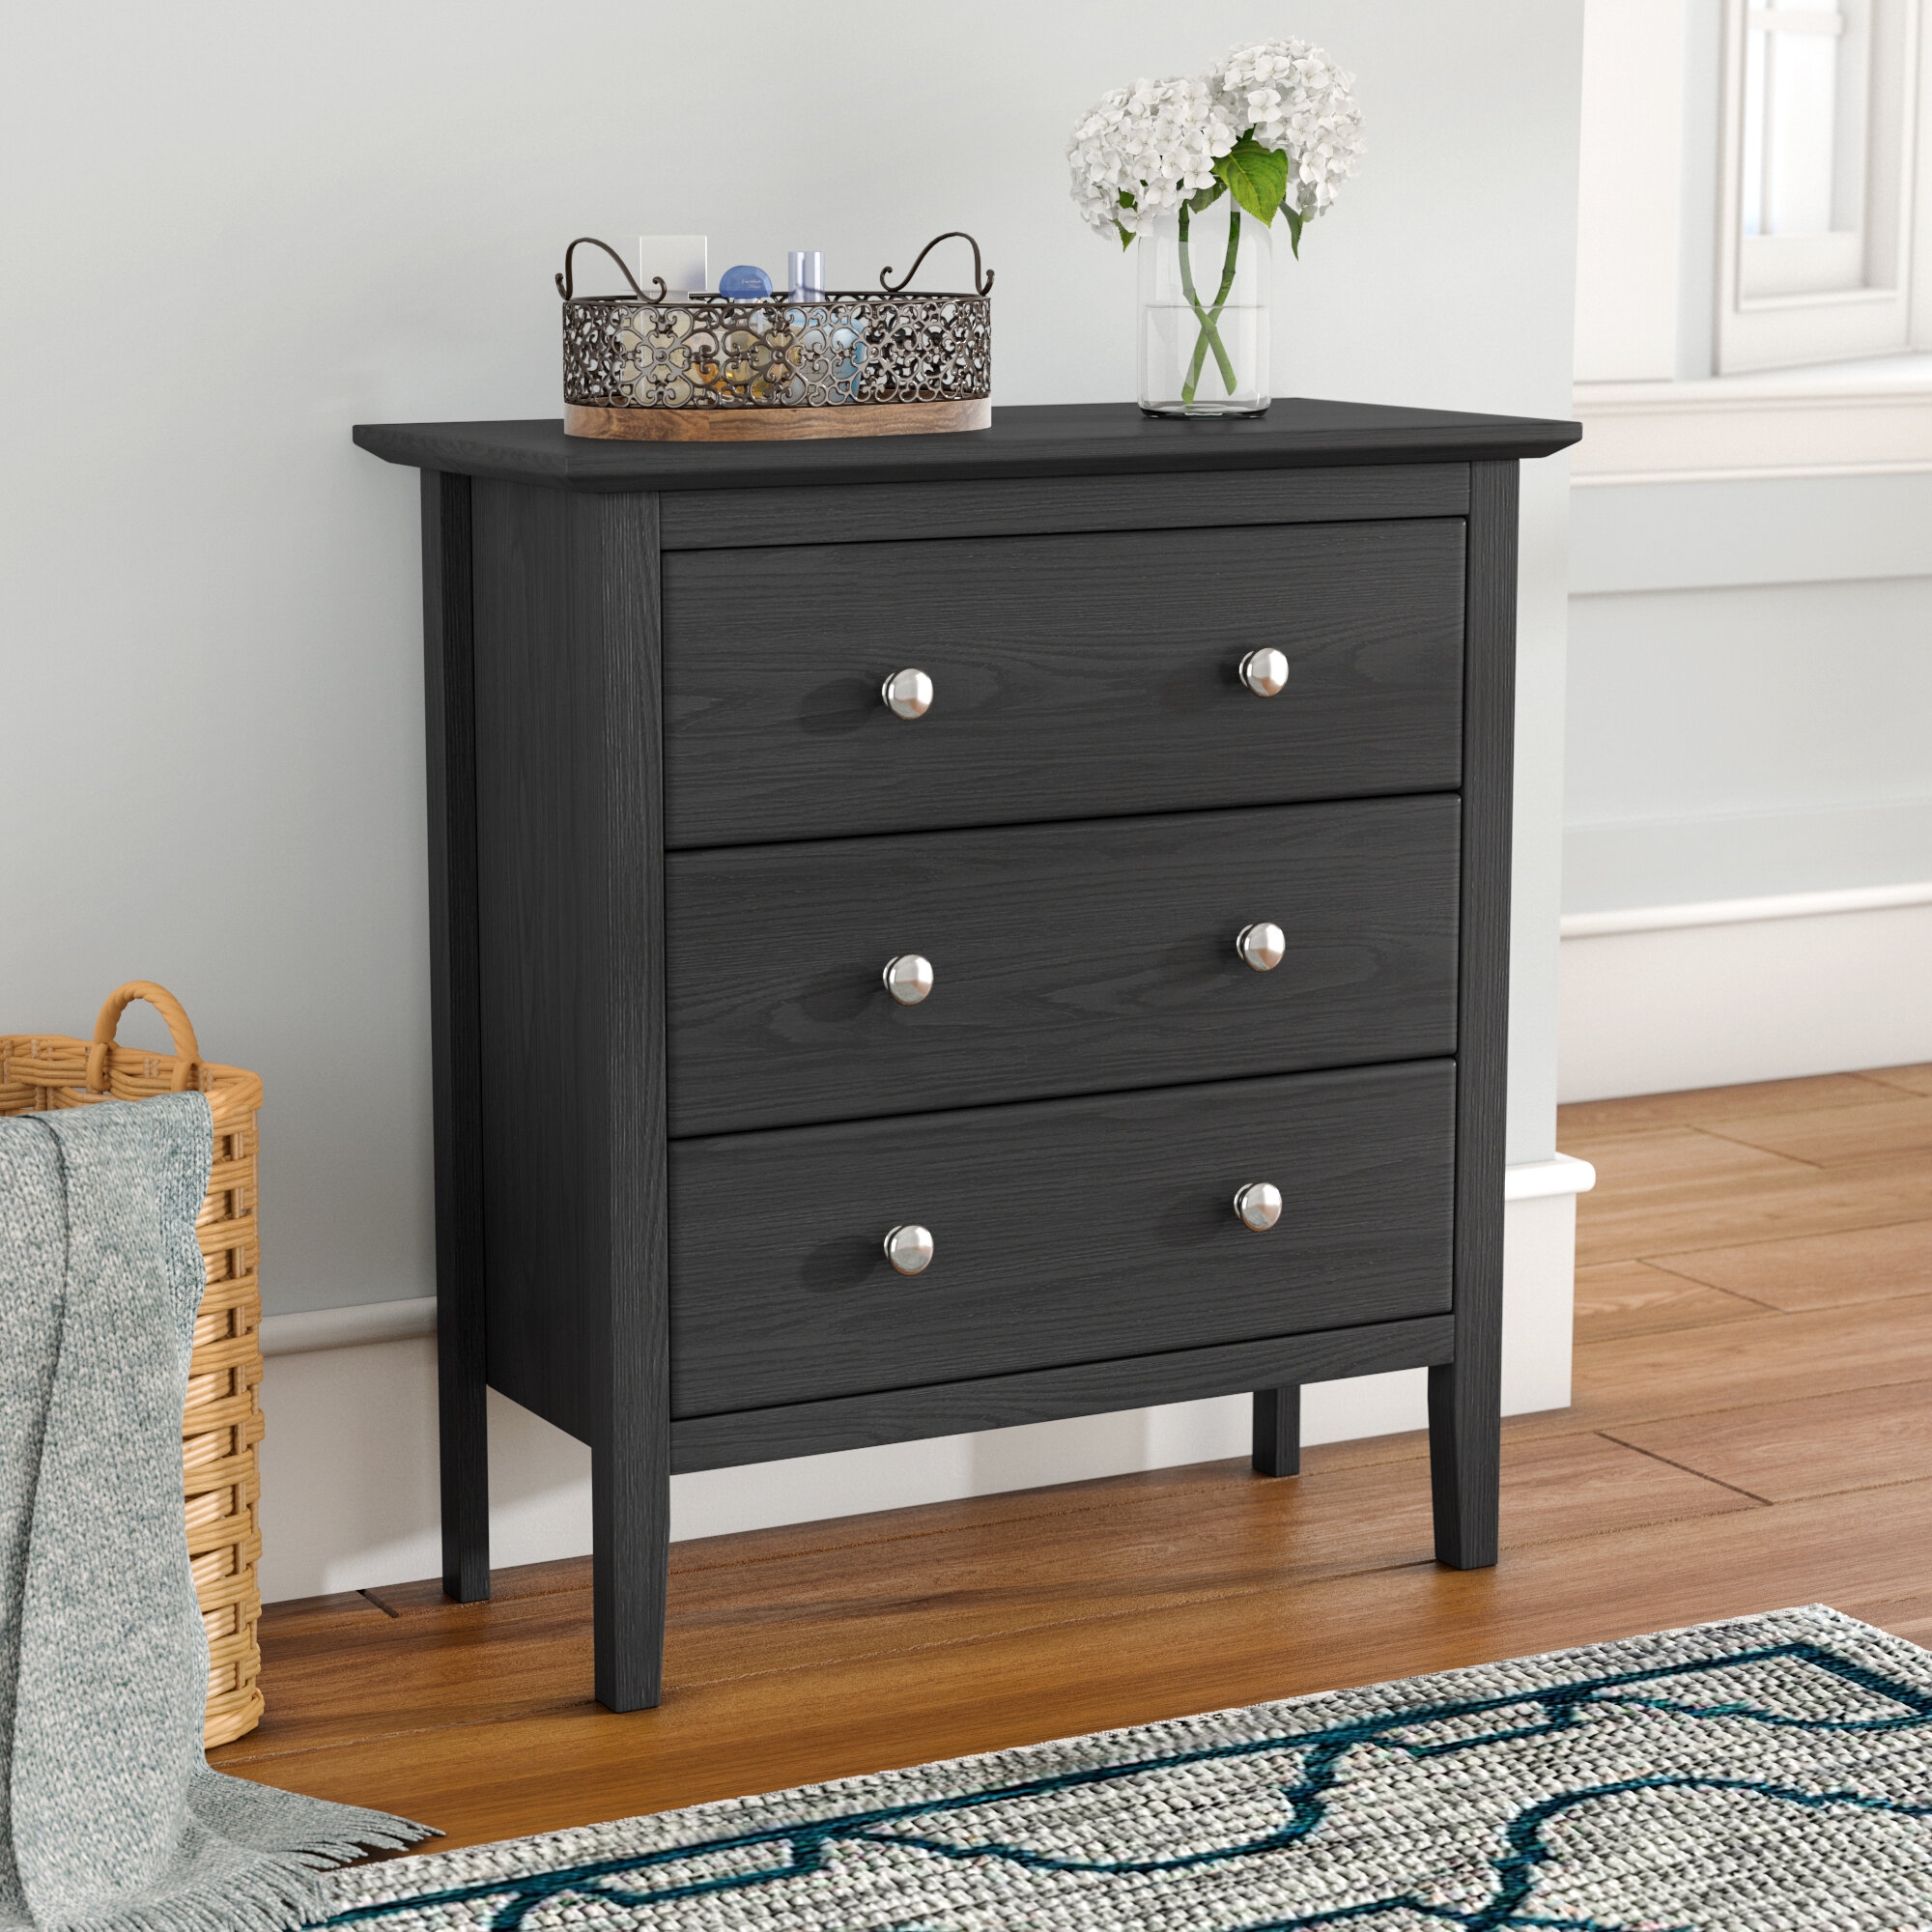 Black Dressers Chest Of Drawers Up To 80 Off This Week Only